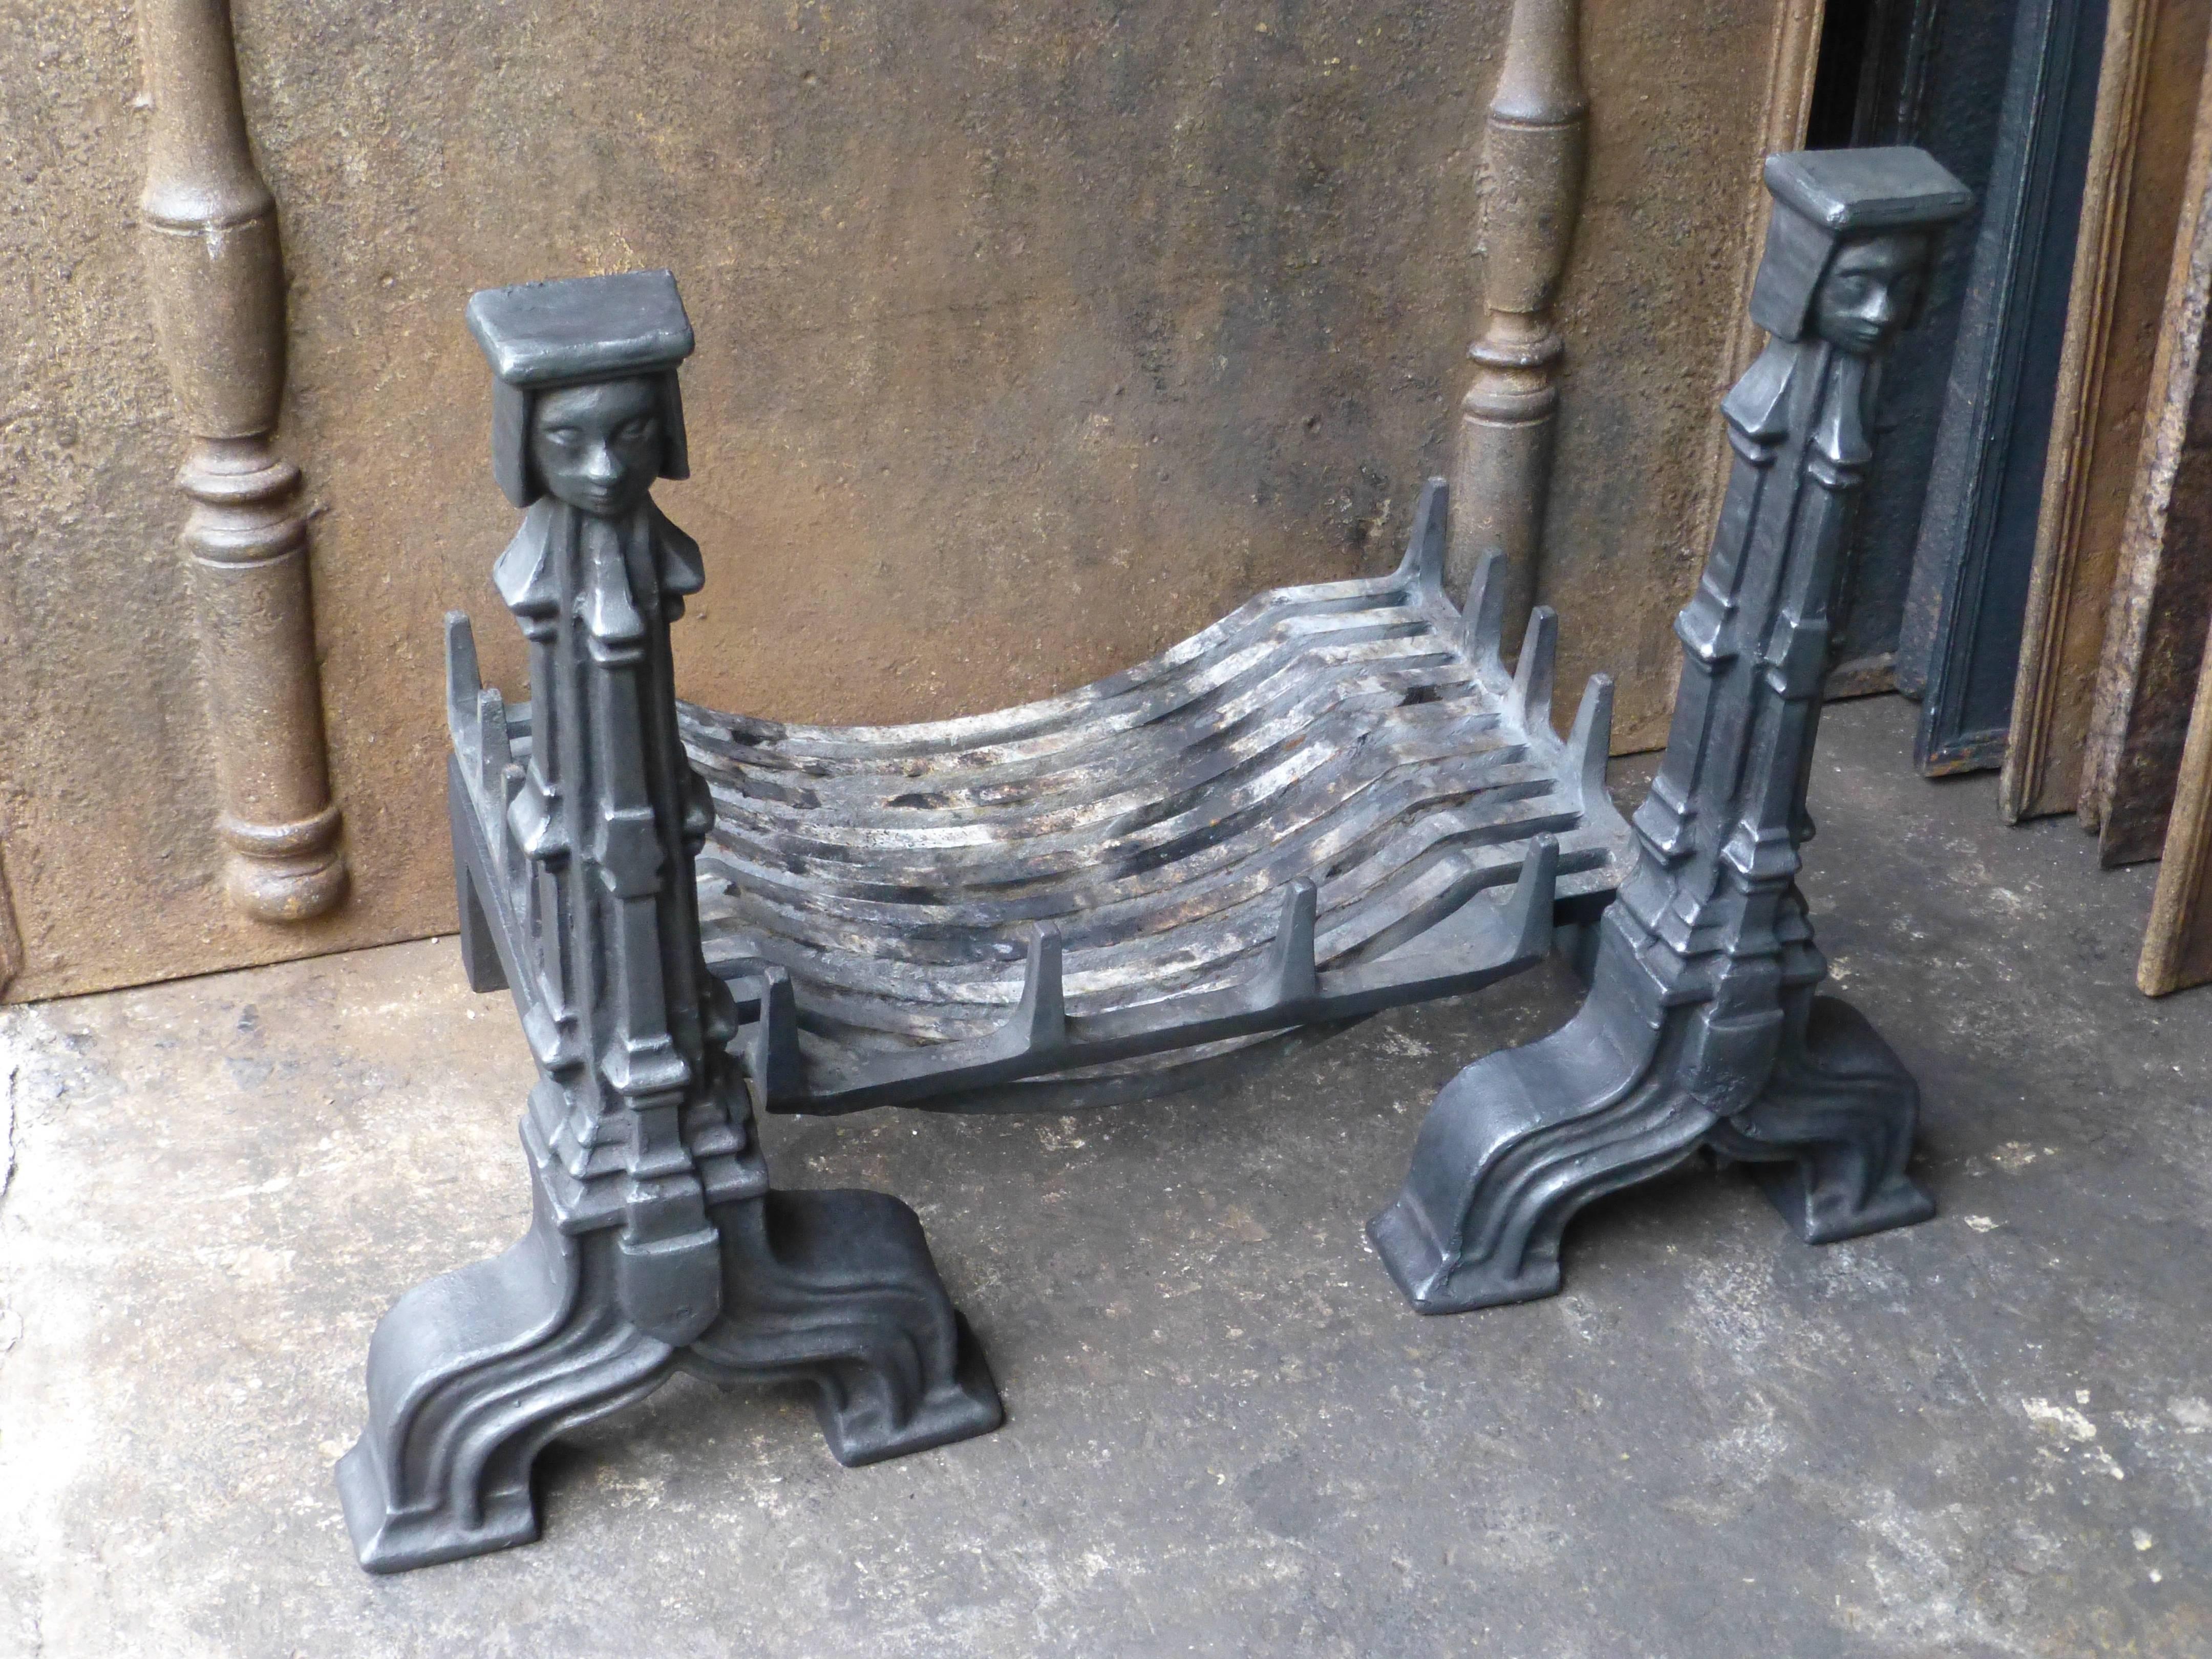 fireplace grates for sale